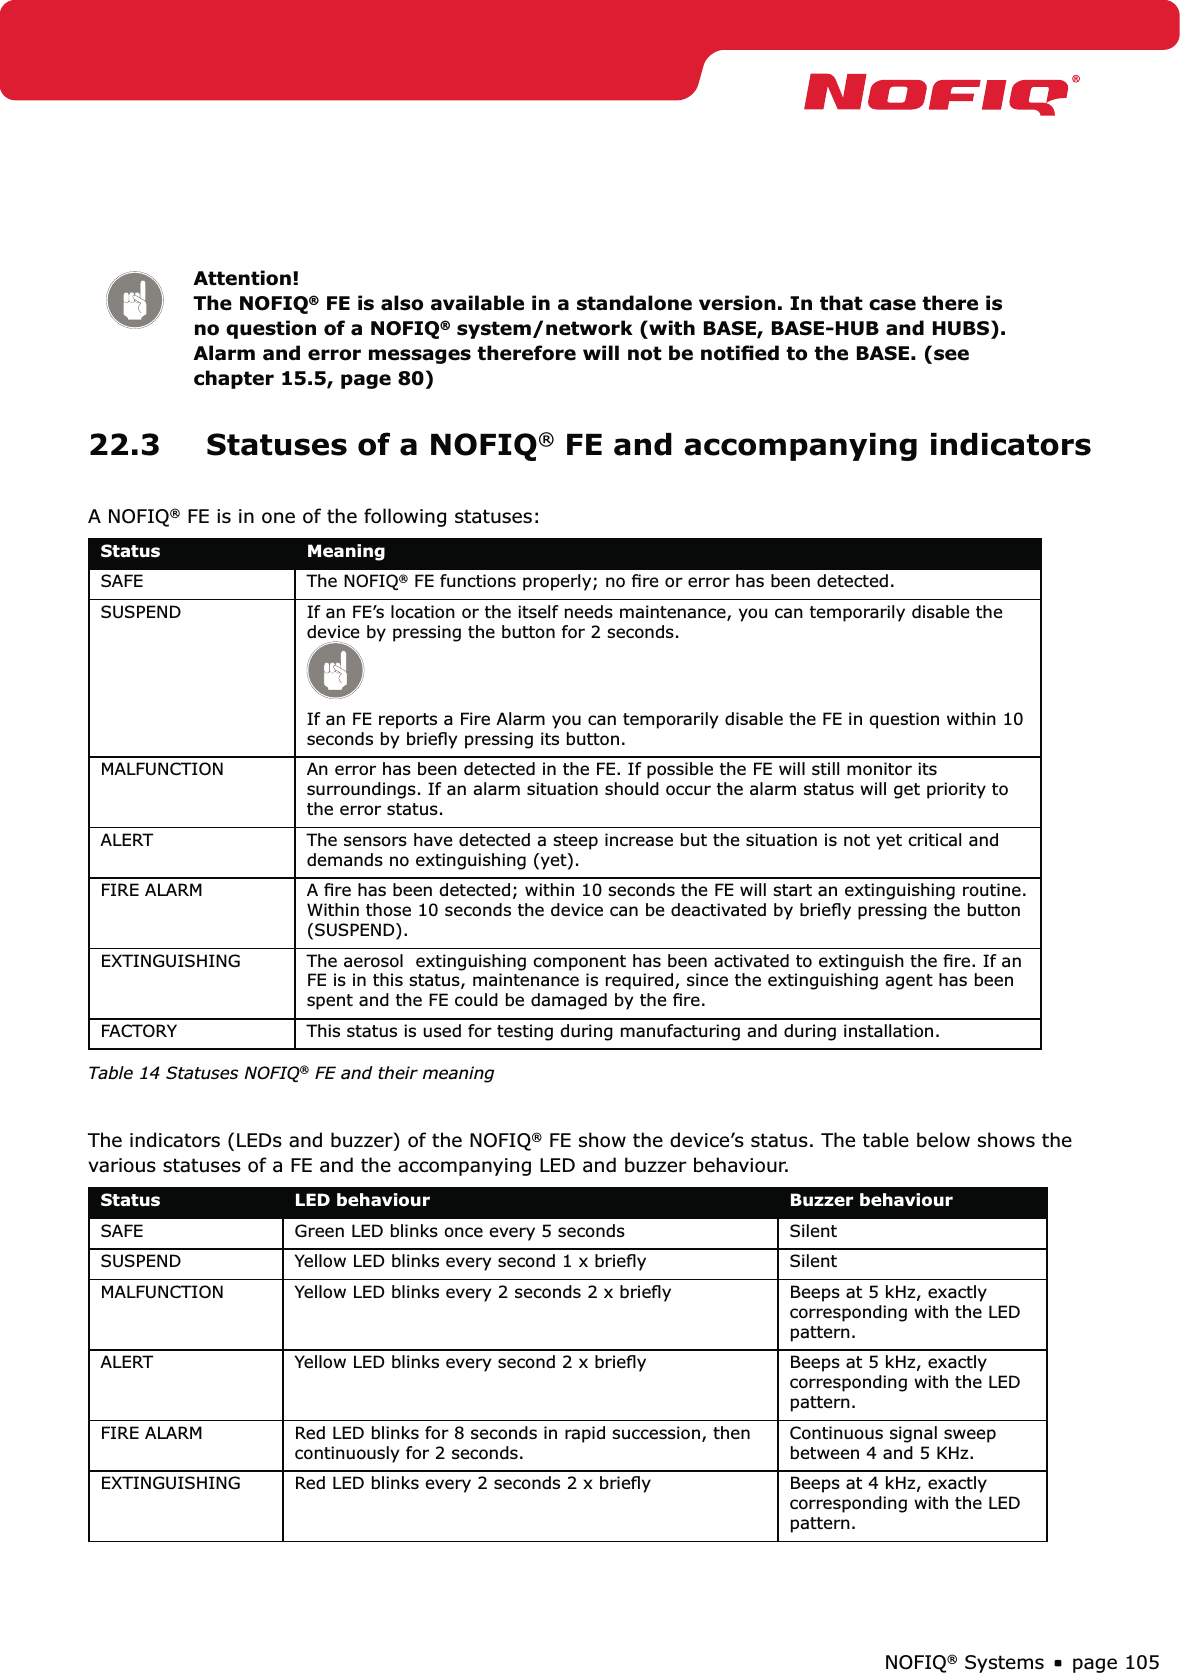 page 105NOFIQ® SystemsAttention! The NOFIQ® FE is also available in a standalone version. In that case there is no question of a NOFIQ® system/network (with BASE, BASE-HUB and HUBS). Alarm and error messages therefore will not be notiﬁed to the BASE. (see chapter 15.5, page 80)22.3  Statuses of a NOFIQ® FE and accompanying indicatorsA NOFIQ® FE is in one of the following statuses:Status MeaningSAFE The NOFIQ® FE functions properly; no ﬁre or error has been detected.SUSPEND If an FE’s location or the itself needs maintenance, you can temporarily disable the device by pressing the button for 2 seconds.  If an FE reports a Fire Alarm you can temporarily disable the FE in question within 10 seconds by brieﬂy pressing its button.MALFUNCTION An error has been detected in the FE. If possible the FE will still monitor its surroundings. If an alarm situation should occur the alarm status will get priority to the error status.ALERT The sensors have detected a steep increase but the situation is not yet critical and demands no extinguishing (yet). FIRE ALARM A ﬁre has been detected; within 10 seconds the FE will start an extinguishing routine. Within those 10 seconds the device can be deactivated by brieﬂy pressing the button (SUSPEND).EXTINGUISHING The aerosol  extinguishing component has been activated to extinguish the ﬁre. If an FE is in this status, maintenance is required, since the extinguishing agent has been spent and the FE could be damaged by the ﬁre.FACTORY This status is used for testing during manufacturing and during installation.Table 14 Statuses NOFIQ® FE and their meaningThe indicators (LEDs and buzzer) of the NOFIQ® FE show the device’s status. The table below shows the various statuses of a FE and the accompanying LED and buzzer behaviour.Status LED behaviour Buzzer behaviourSAFE Green LED blinks once every 5 seconds SilentSUSPEND Yellow LED blinks every second 1 x brieﬂy SilentMALFUNCTION Yellow LED blinks every 2 seconds 2 x brieﬂy Beeps at 5 kHz, exactly corresponding with the LED pattern.ALERT Yellow LED blinks every second 2 x brieﬂy Beeps at 5 kHz, exactly corresponding with the LED pattern.FIRE ALARM Red LED blinks for 8 seconds in rapid succession, then continuously for 2 seconds.Continuous signal sweep between 4 and 5 KHz.EXTINGUISHING Red LED blinks every 2 seconds 2 x brieﬂy Beeps at 4 kHz, exactly corresponding with the LED pattern.